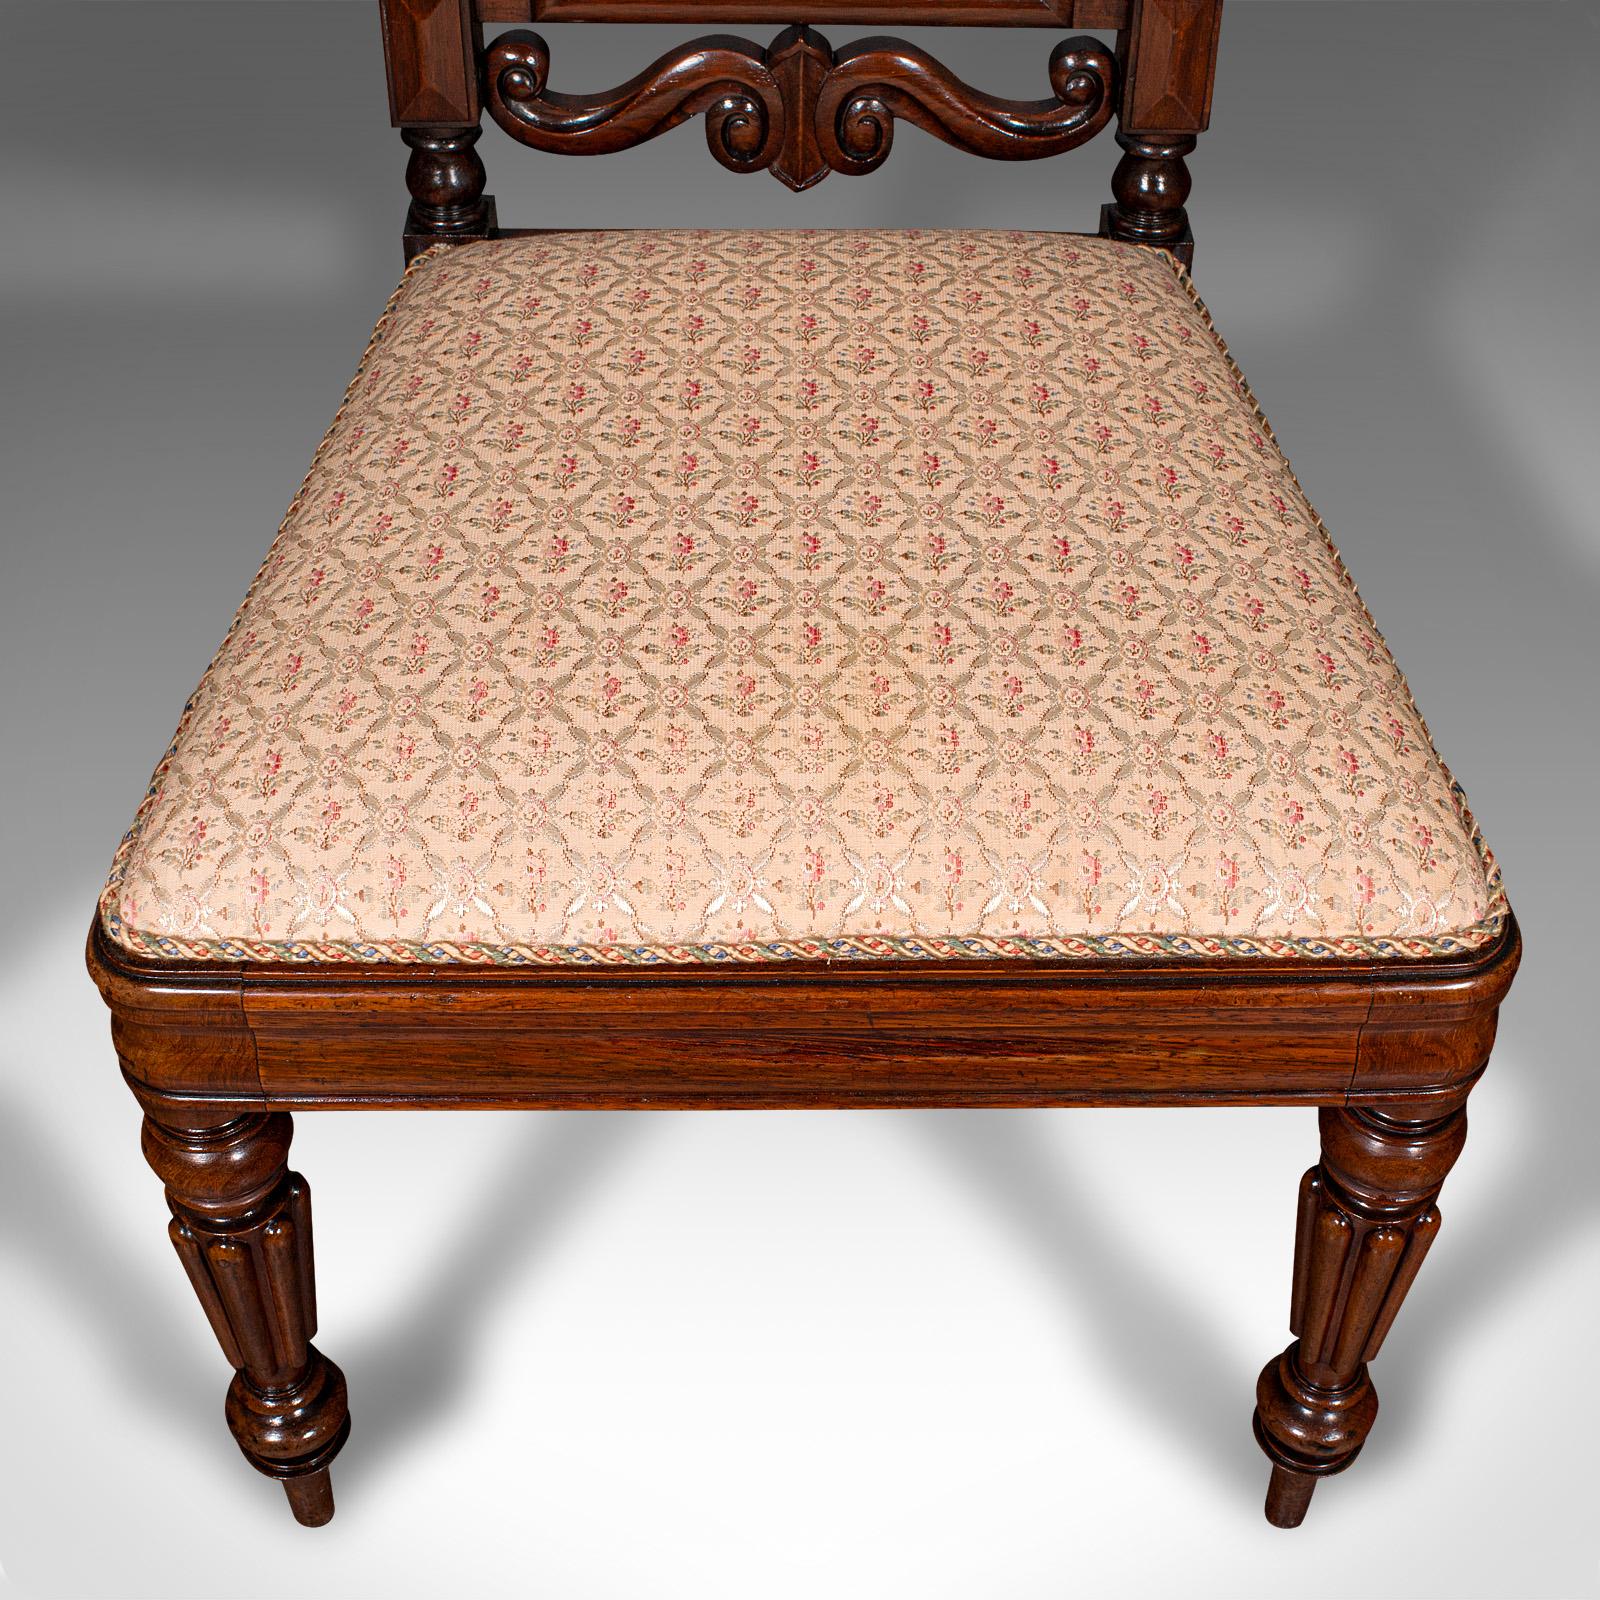 Antique Morning Room Chair, English, Silk Cotton, Side Seat, William IV, C.1835 For Sale 3